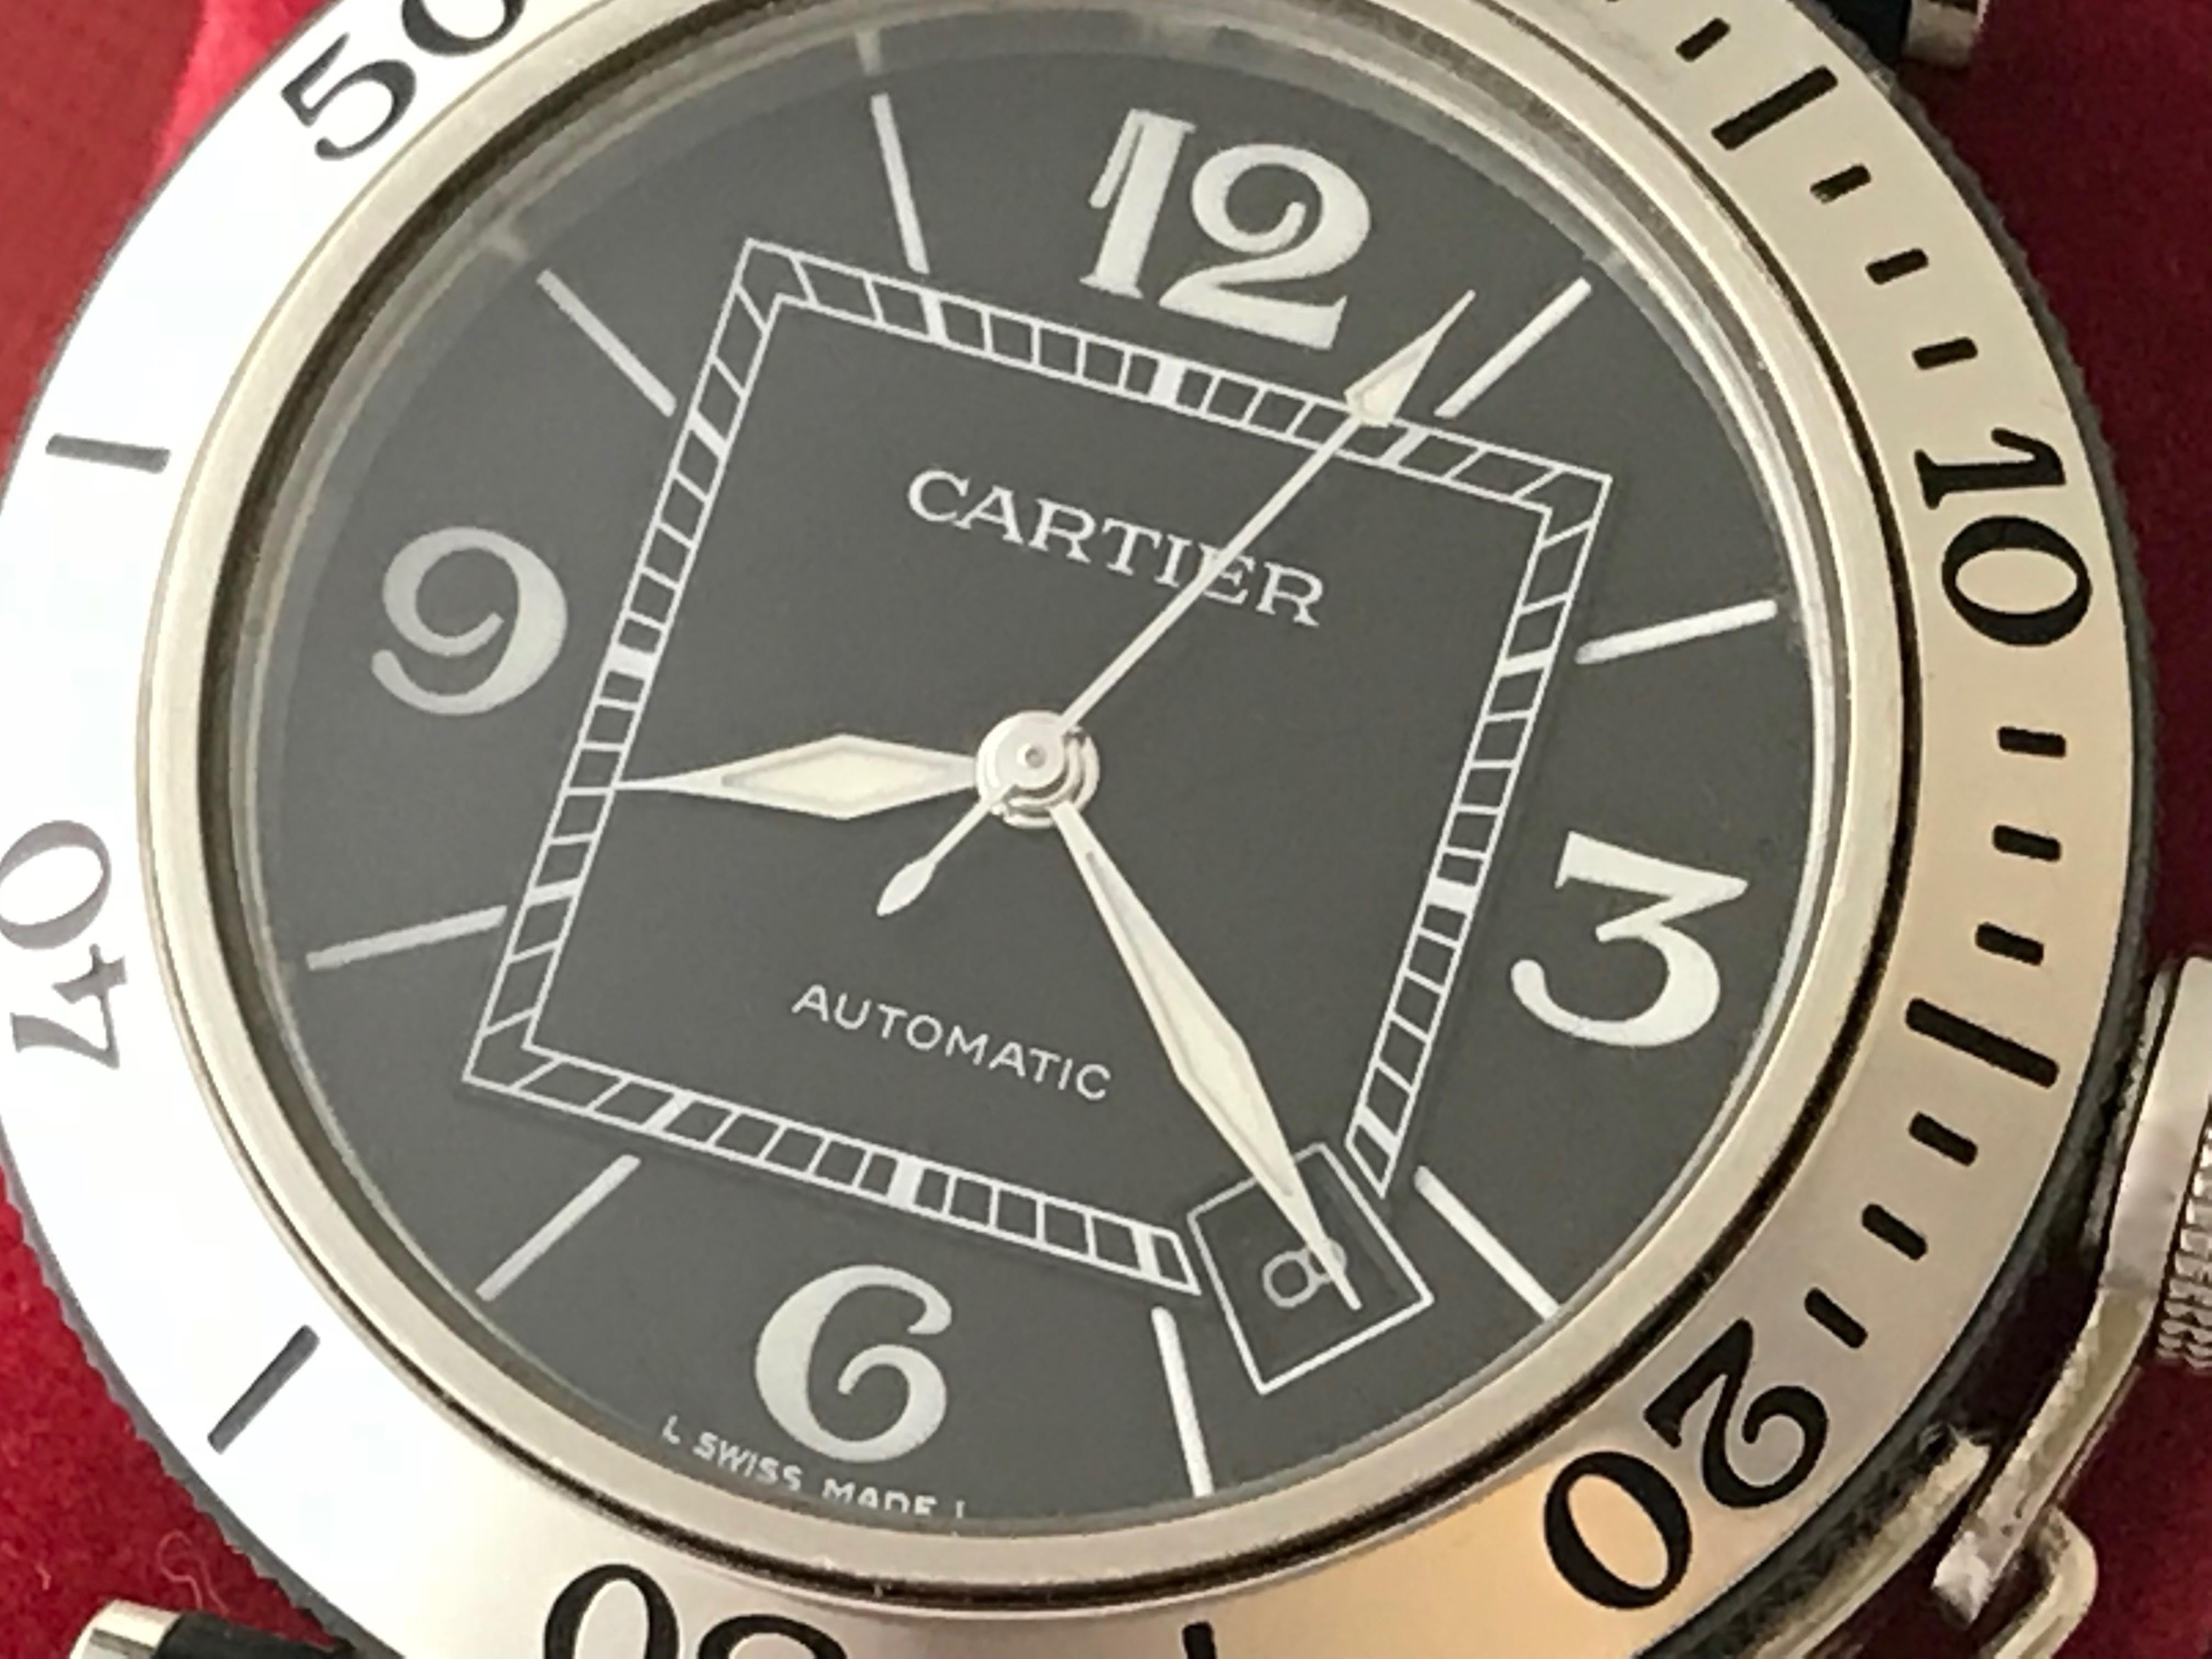 As New Cartier Pasha Mens Seatimer Wristwatch, Automatic Winding with Date. Model W31077U2. Stainless Steel case with rotating bezel (40 mm dia.)  Stainless Steel and Rubber Pasha bracelet with deployant clasp. Black Dial with luminous hour markers